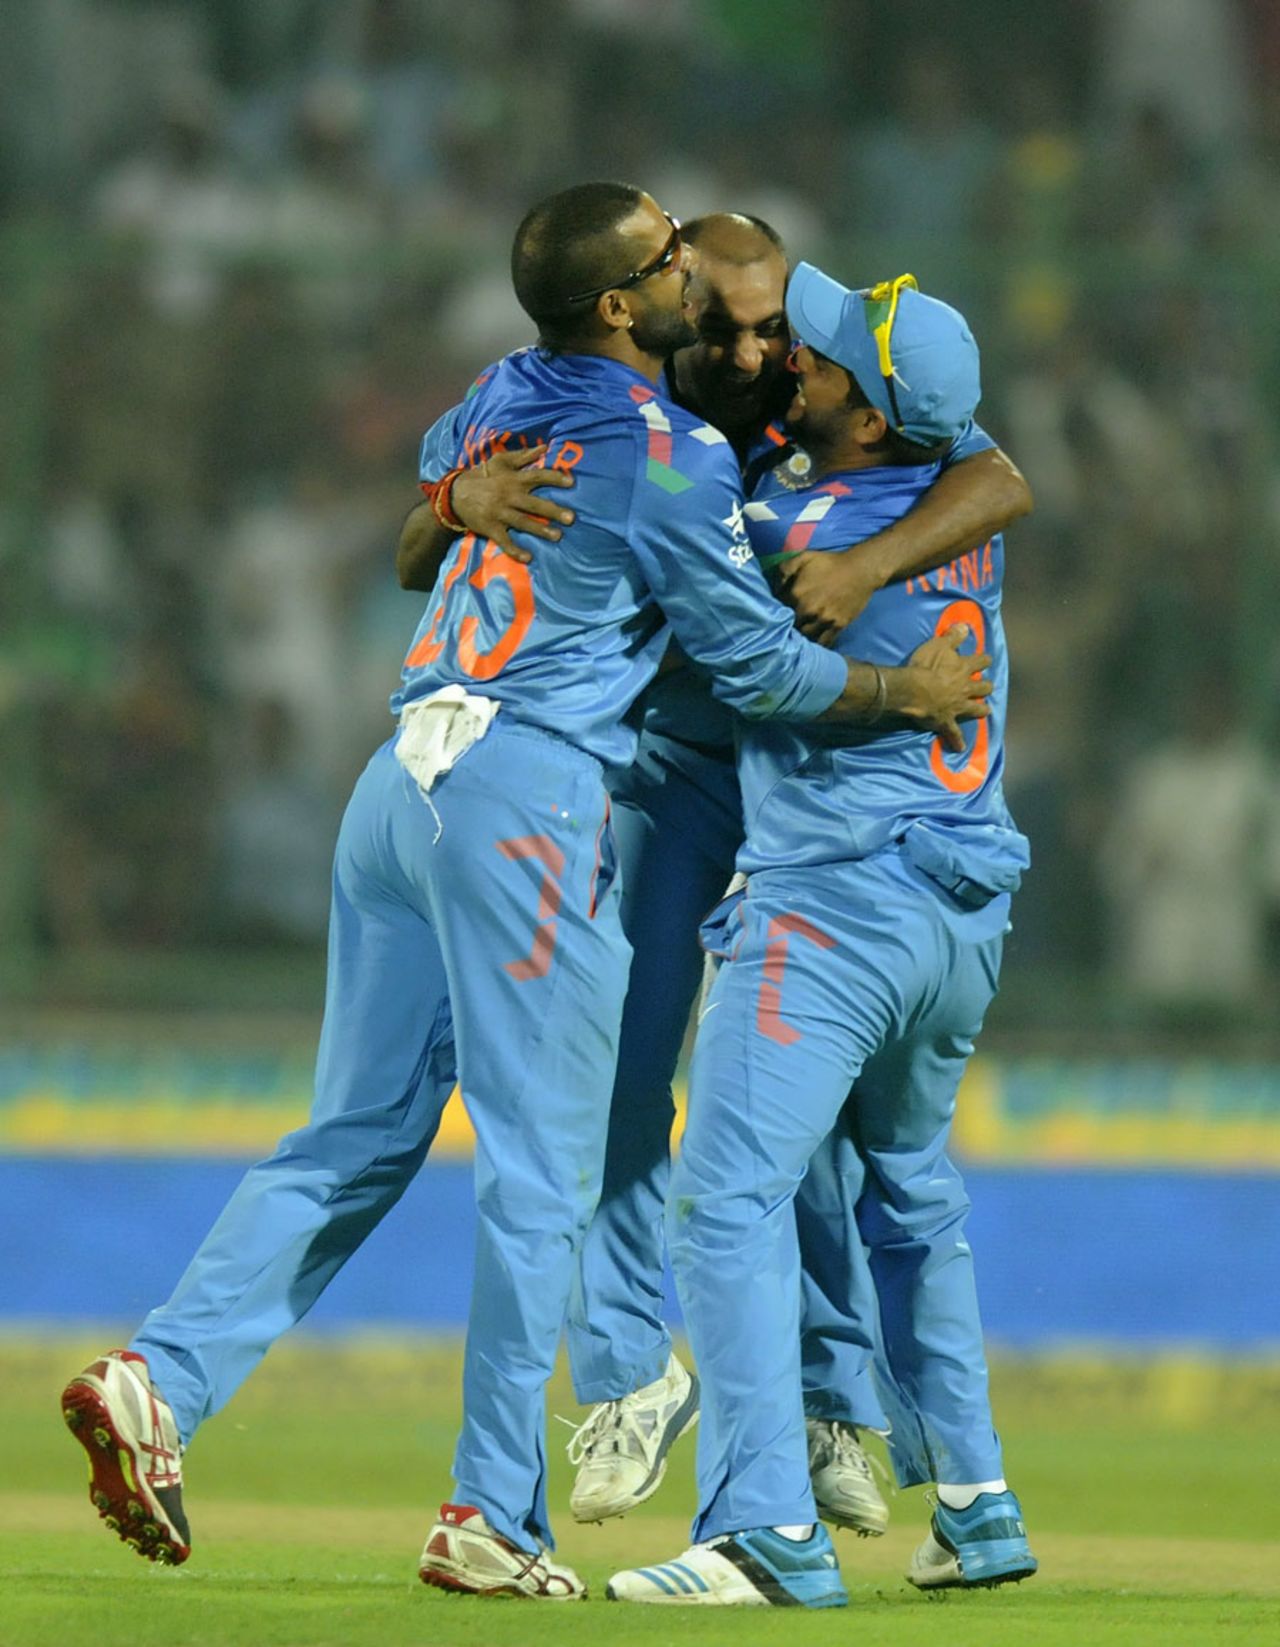 Amit Mishra gets locked in an embrace after collecting a wicket, India v West Indies, 2nd ODI, Delhi, October 11, 2014